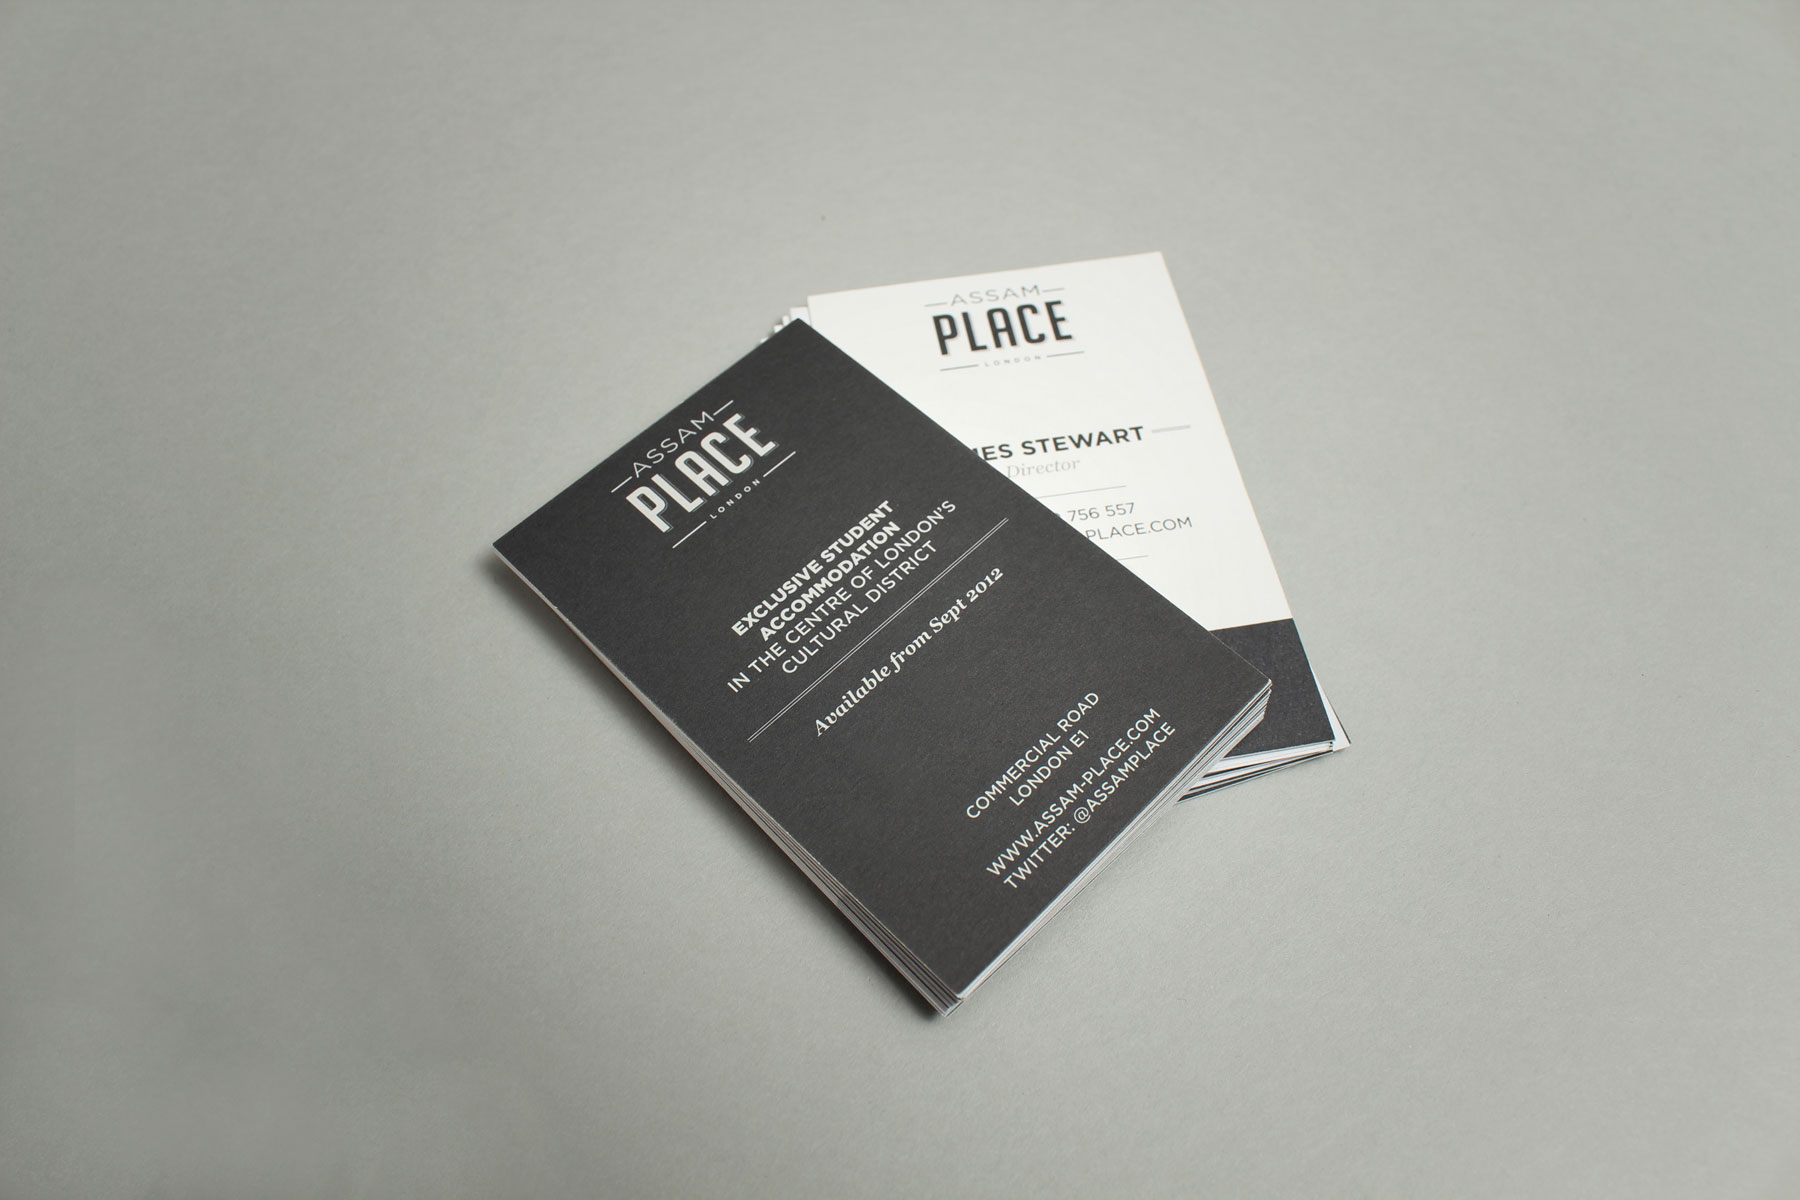 We chose uncoated stock for the correspondence stationery to create a premium feel.